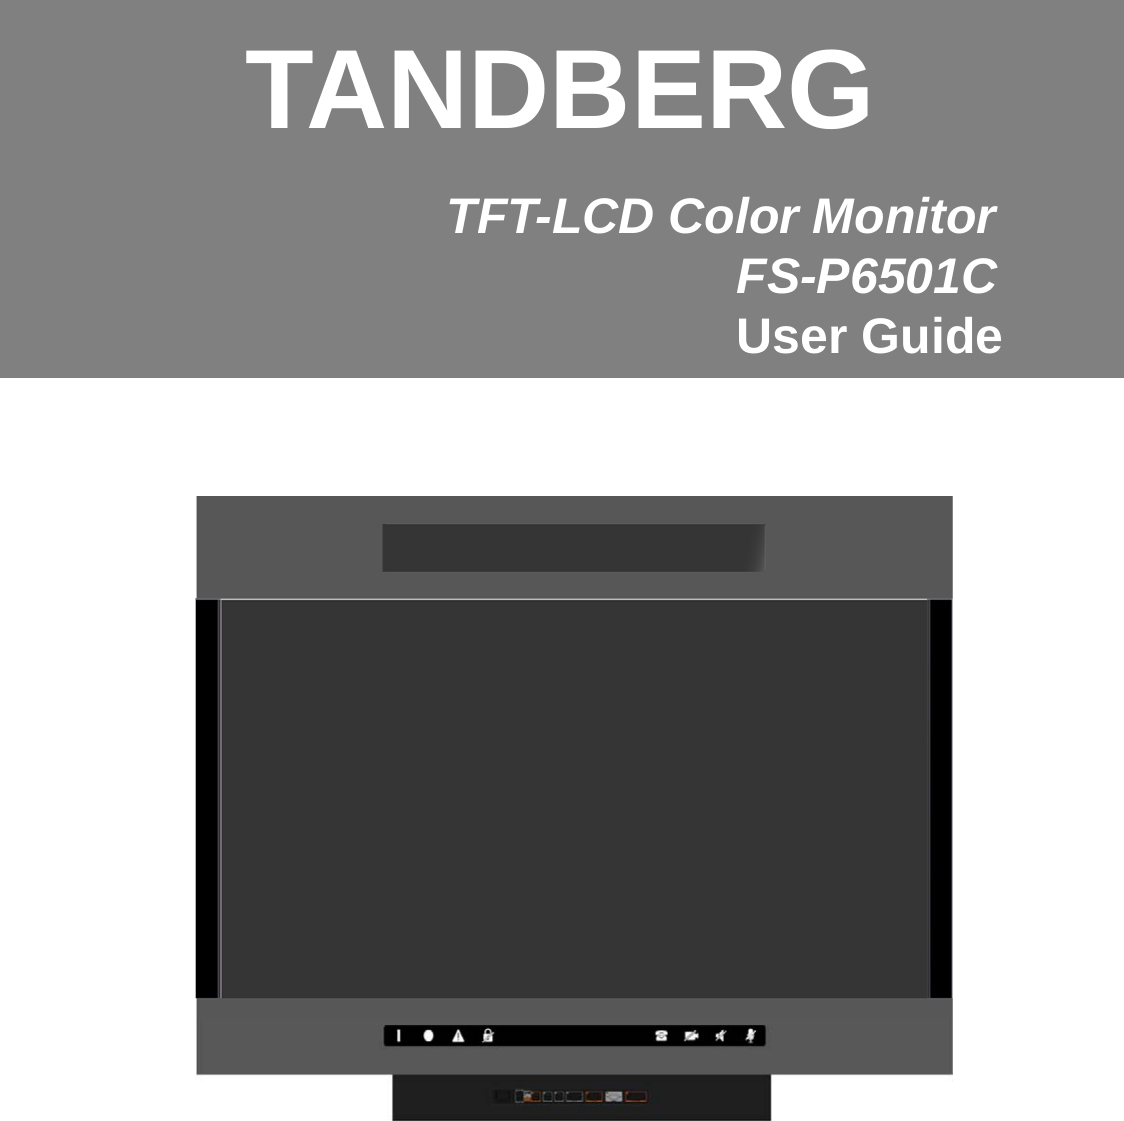 TANDBERGTFT-LCD Color MonitorFS-P6501CUser GuideGeneral Specification 